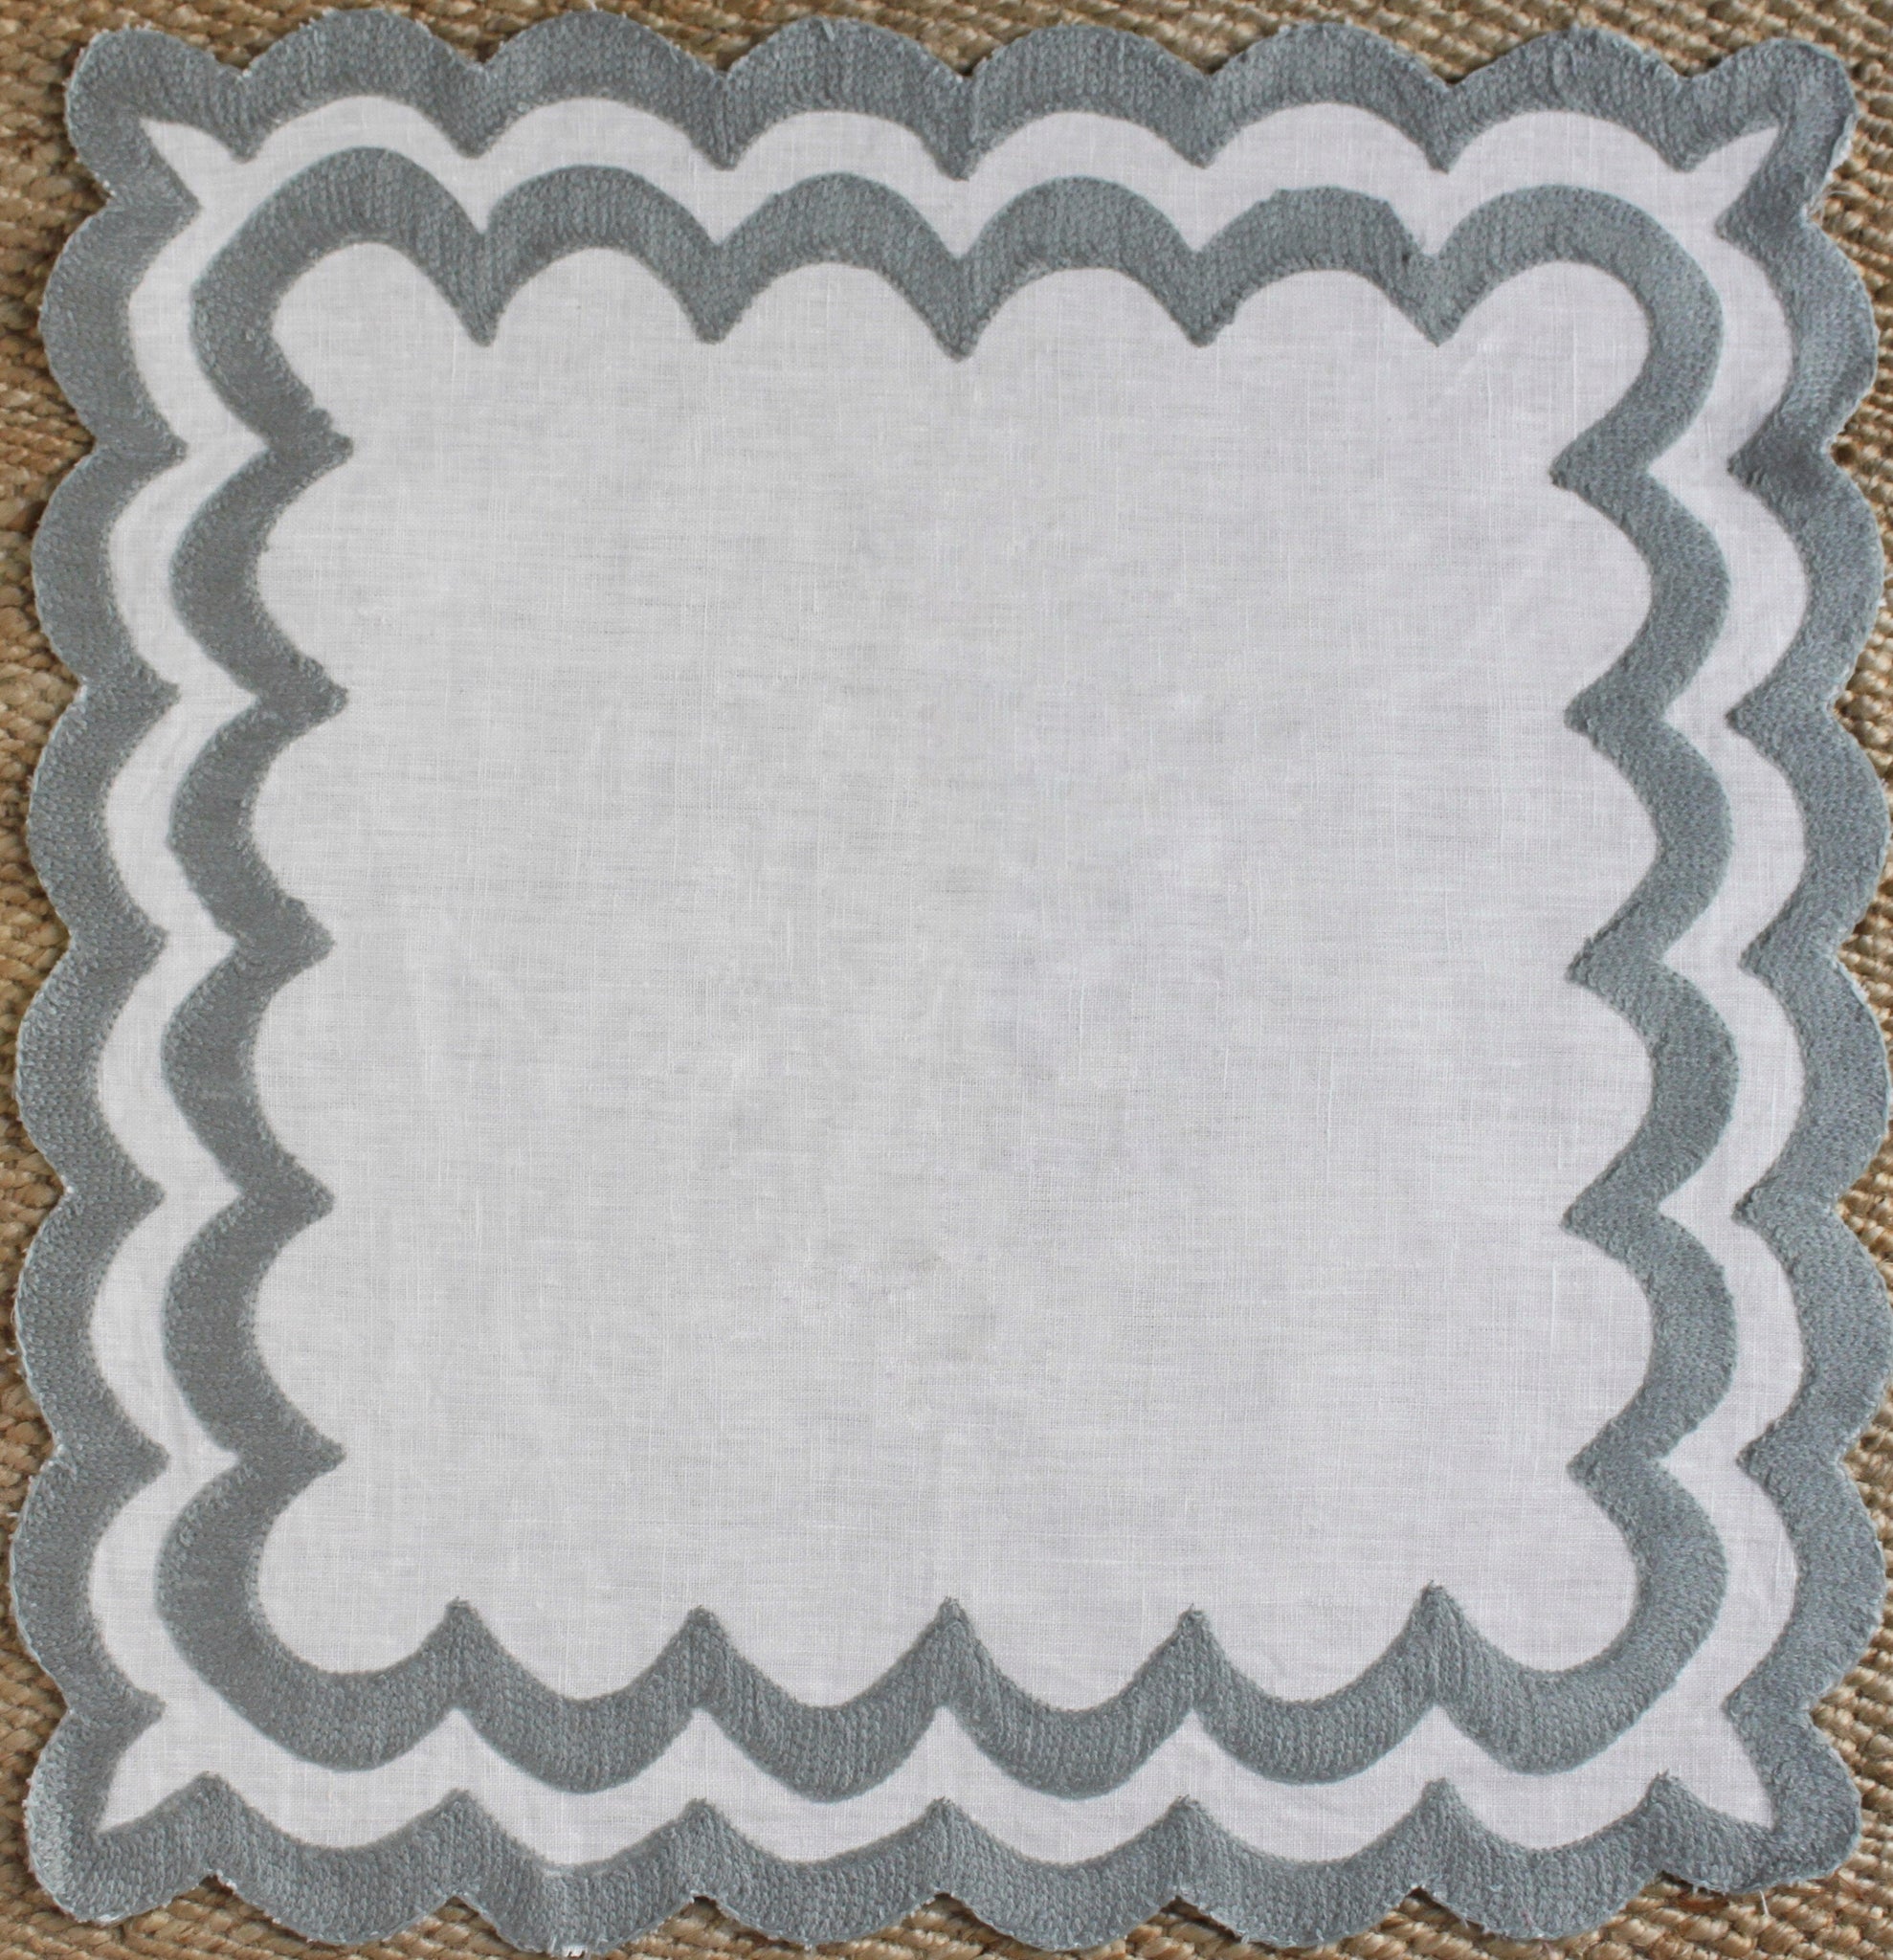 Scalloped Napkins in Dove - Set of Four